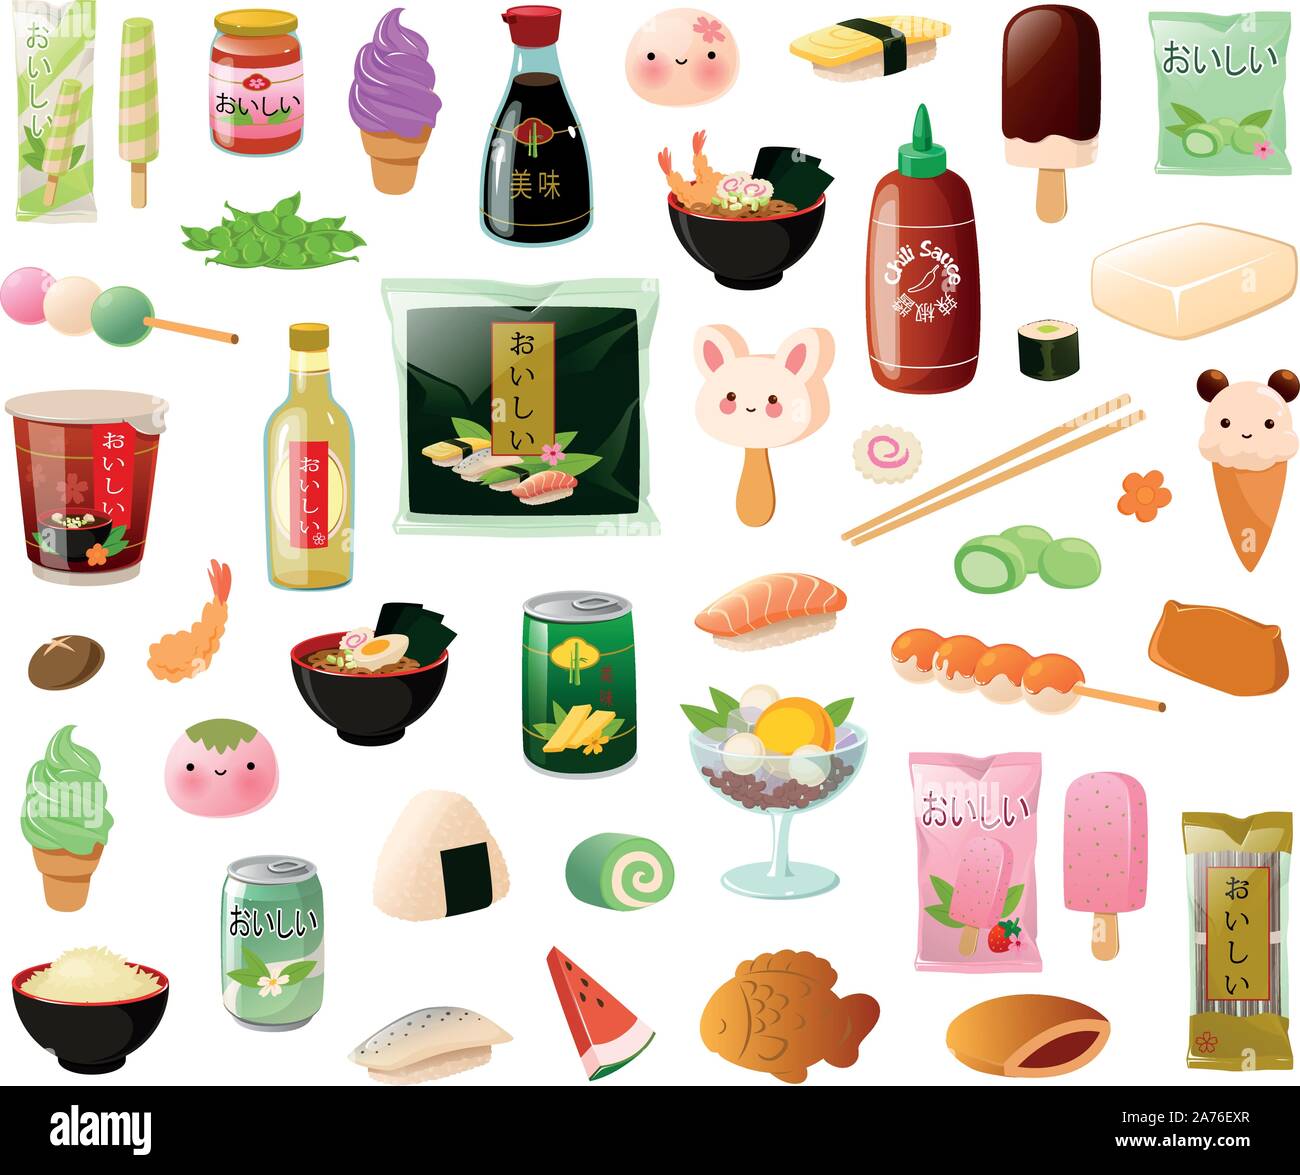 Vector illustration of various Asian Japanese food items, dishes and sweets. Stock Vector